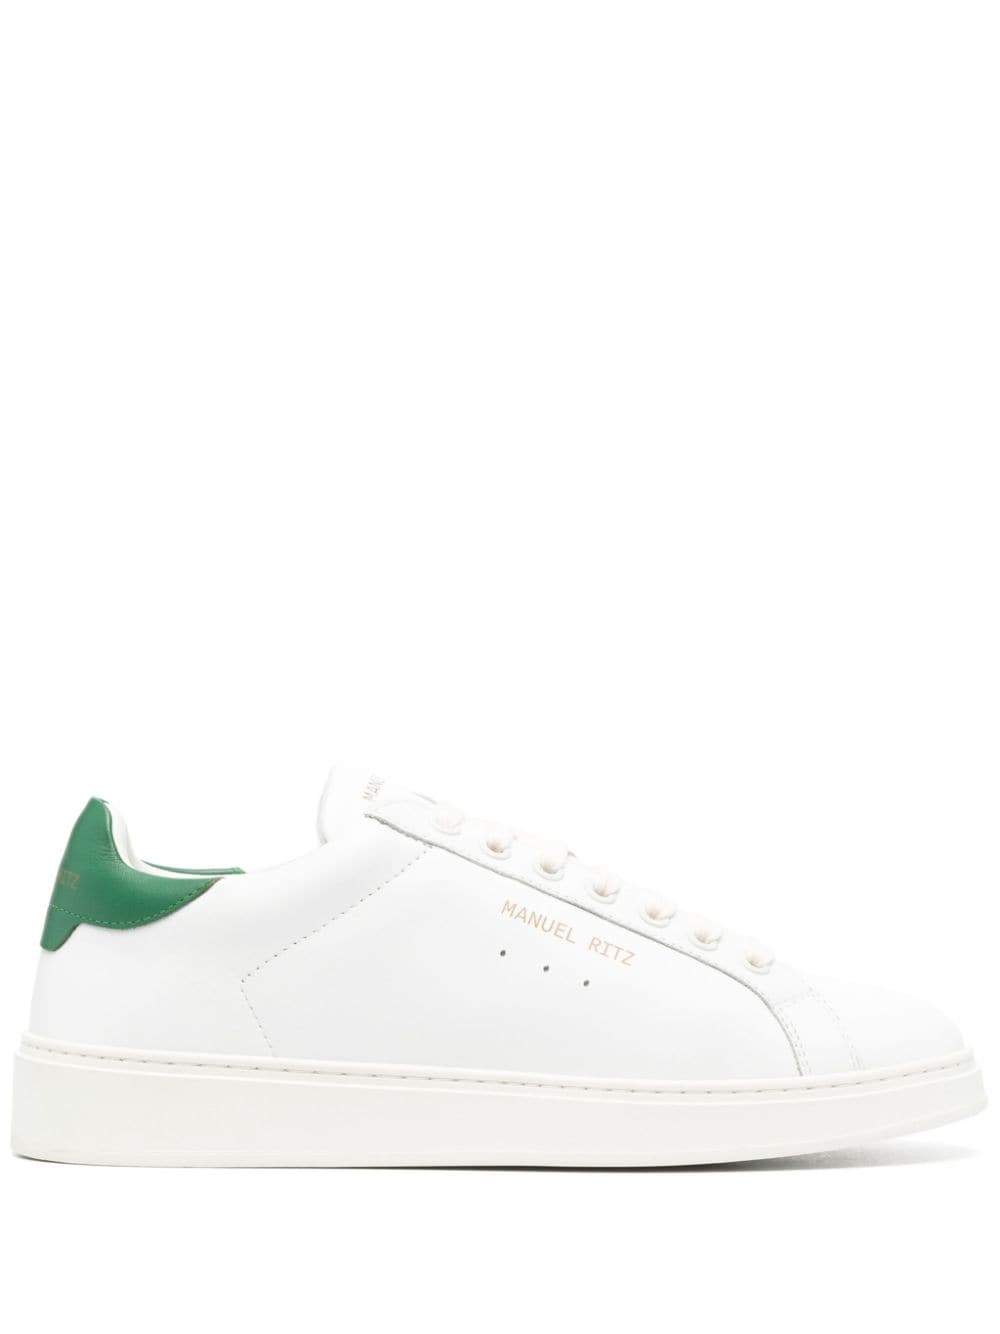 Manuel Ritz Colourblock Panelled Sneakers In White